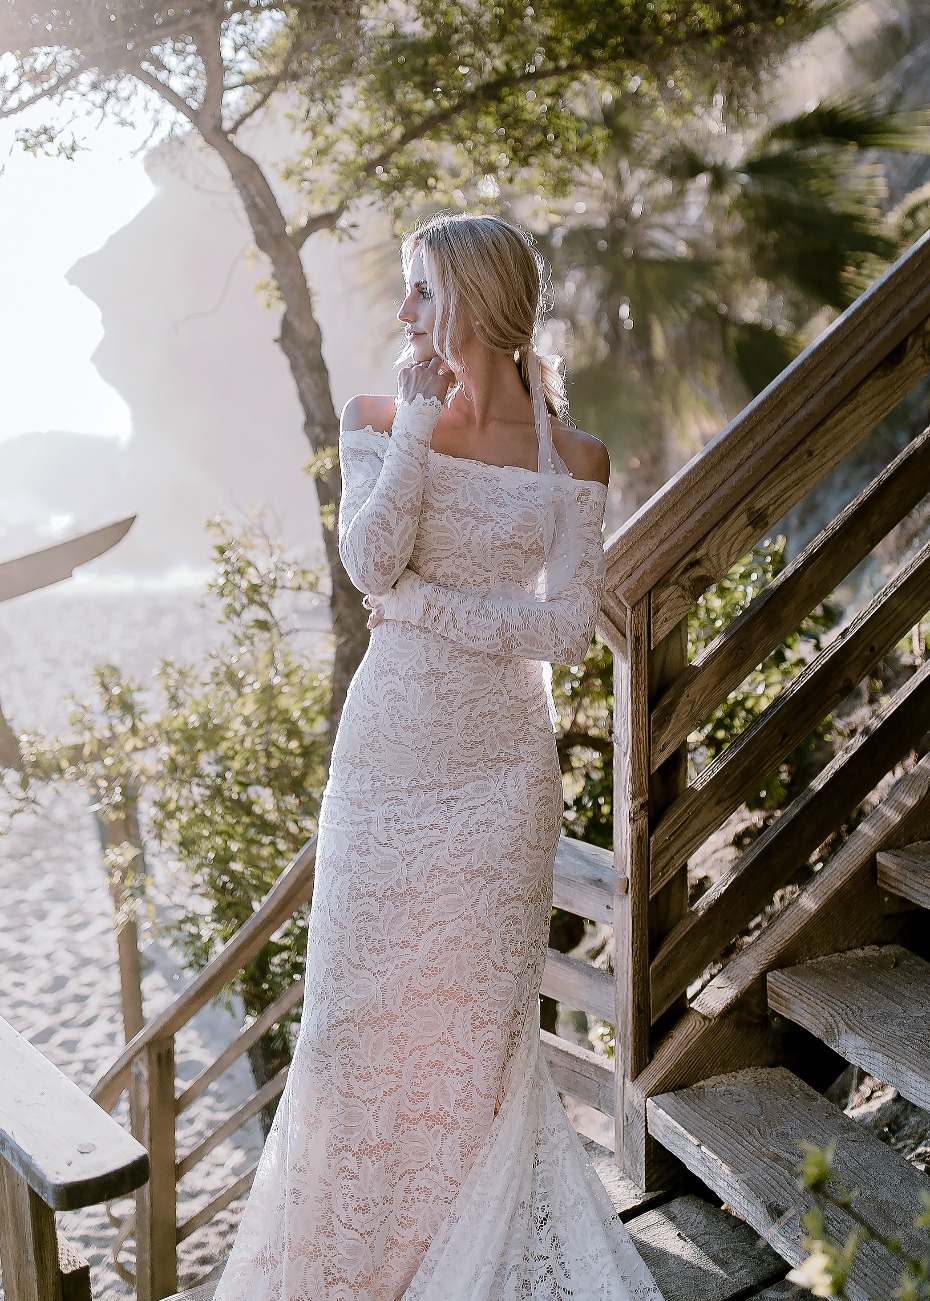 Wear Your Love Has a New Bridal Collection and Youâre Going to âGrowâ Crazy Over It